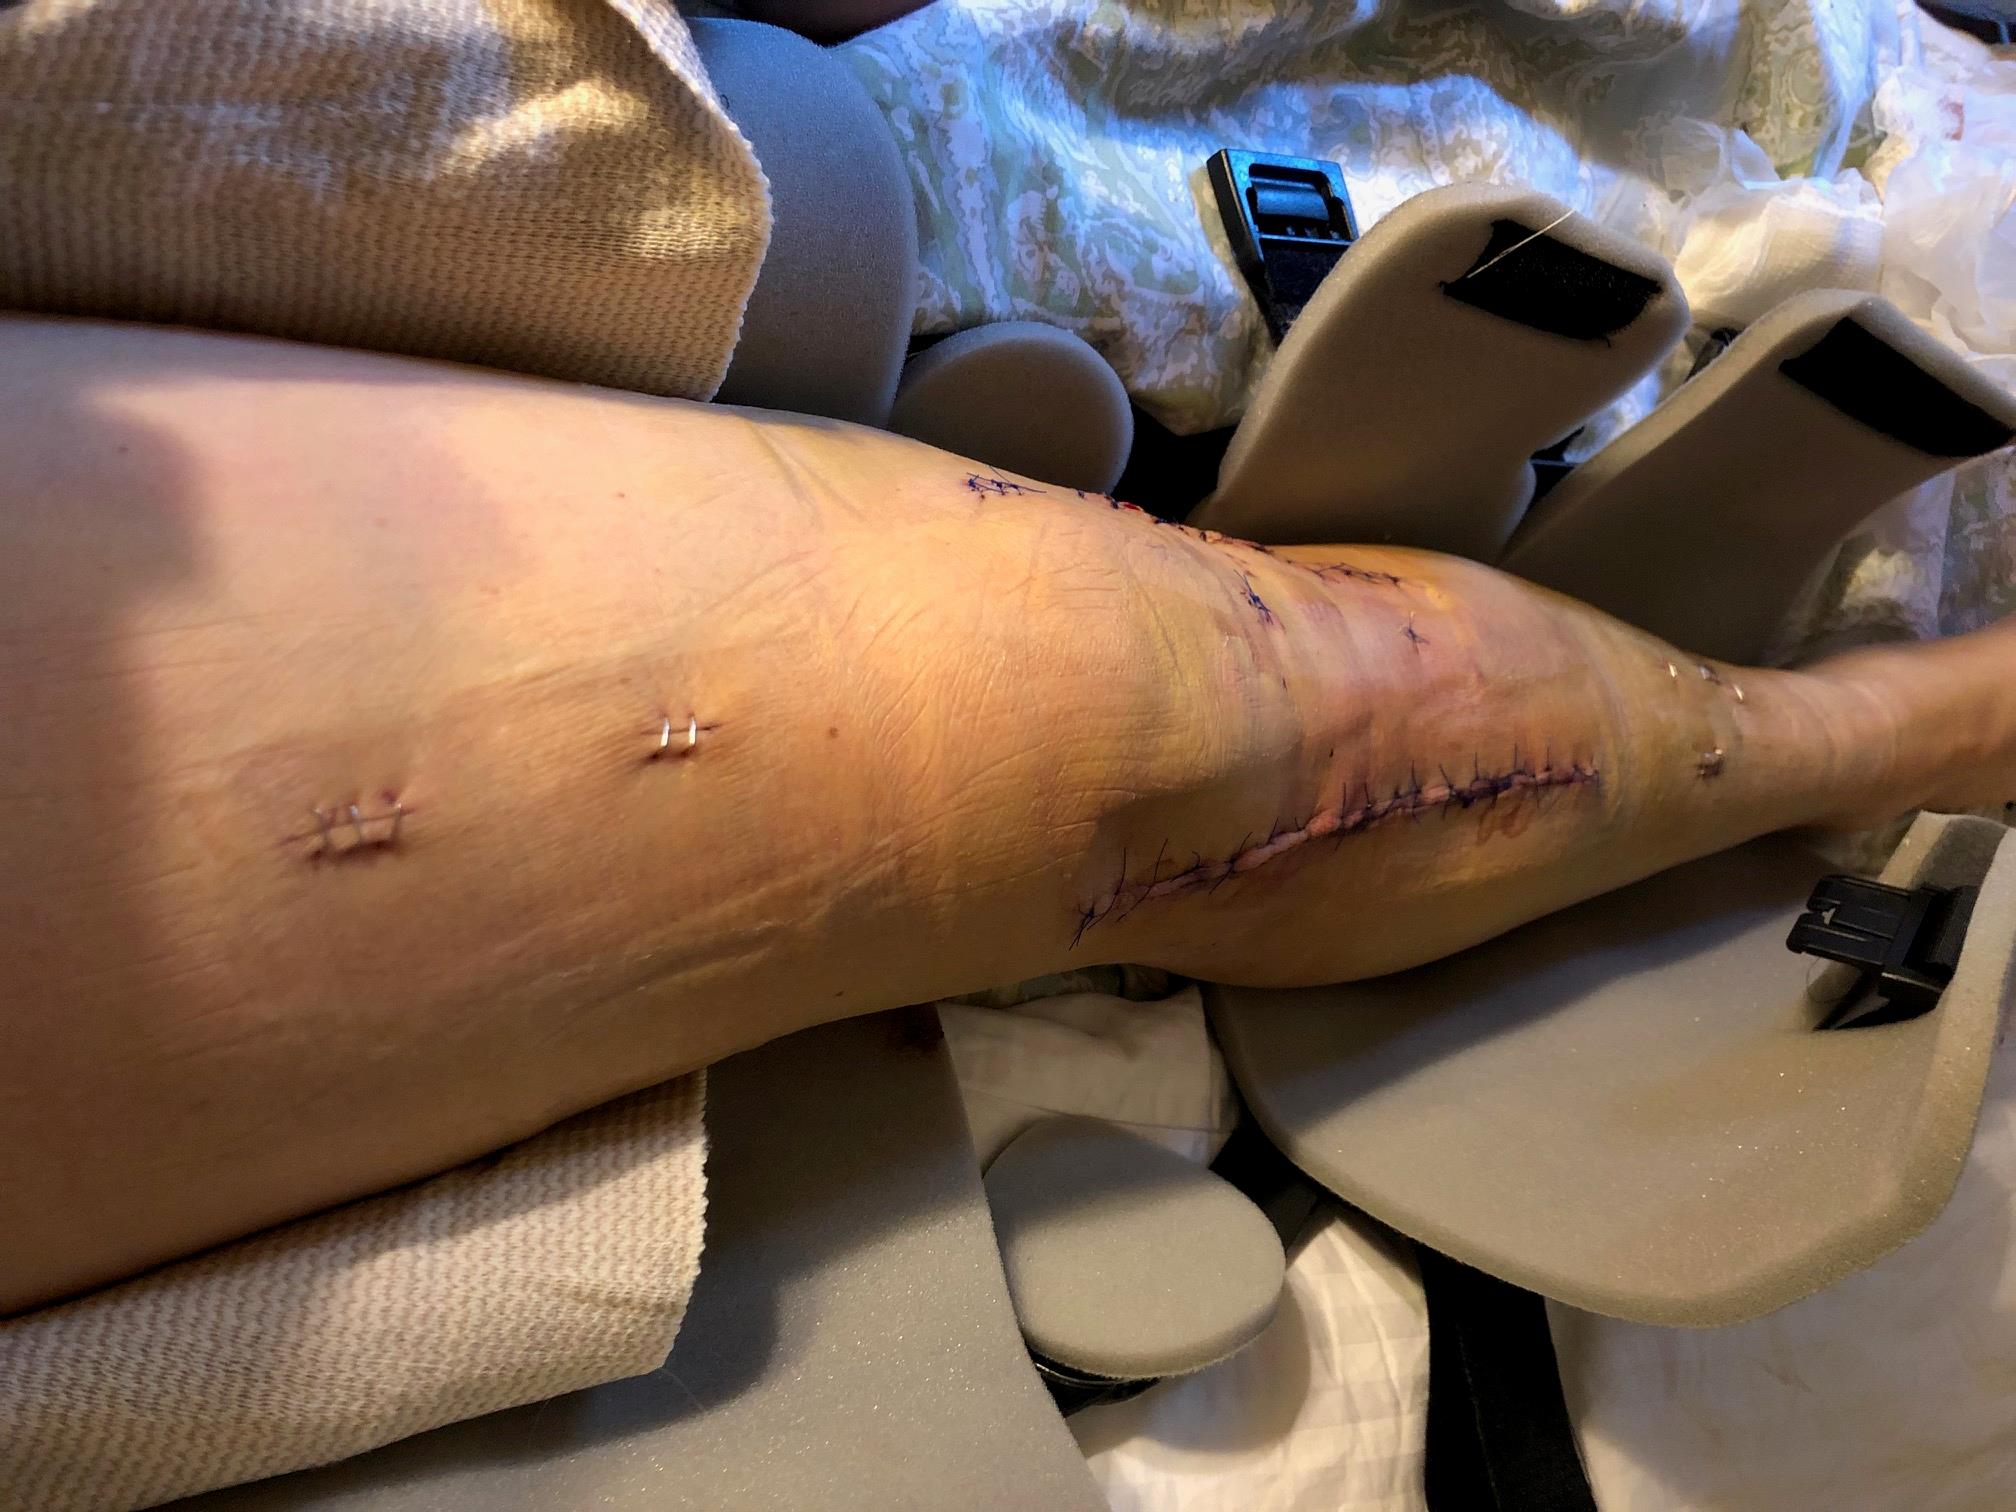 Stitched up shin after a scooter accident